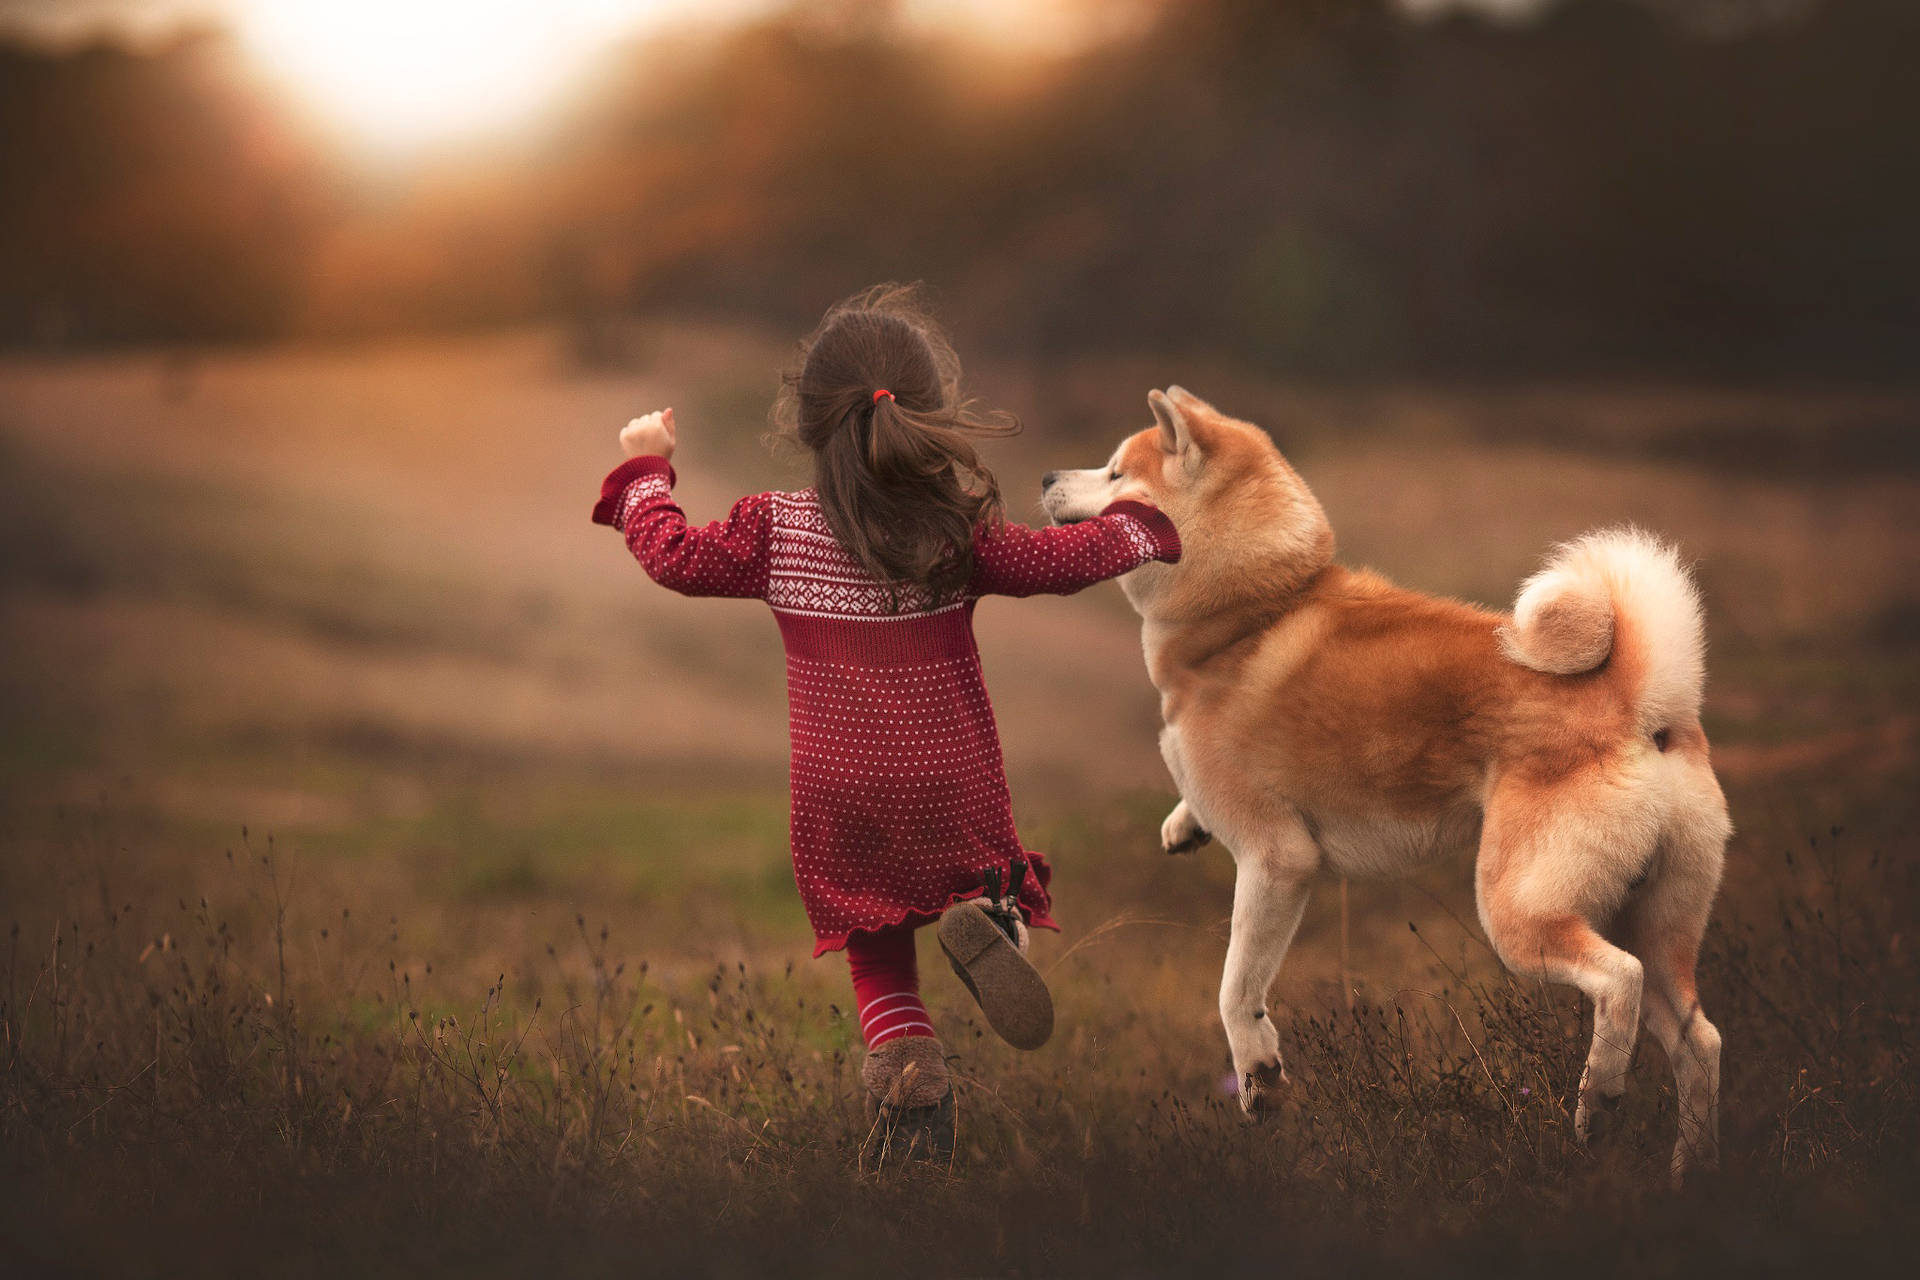 Free Dog And Girl Wallpaper Downloads, [100+] Dog And Girl Wallpapers for  FREE 